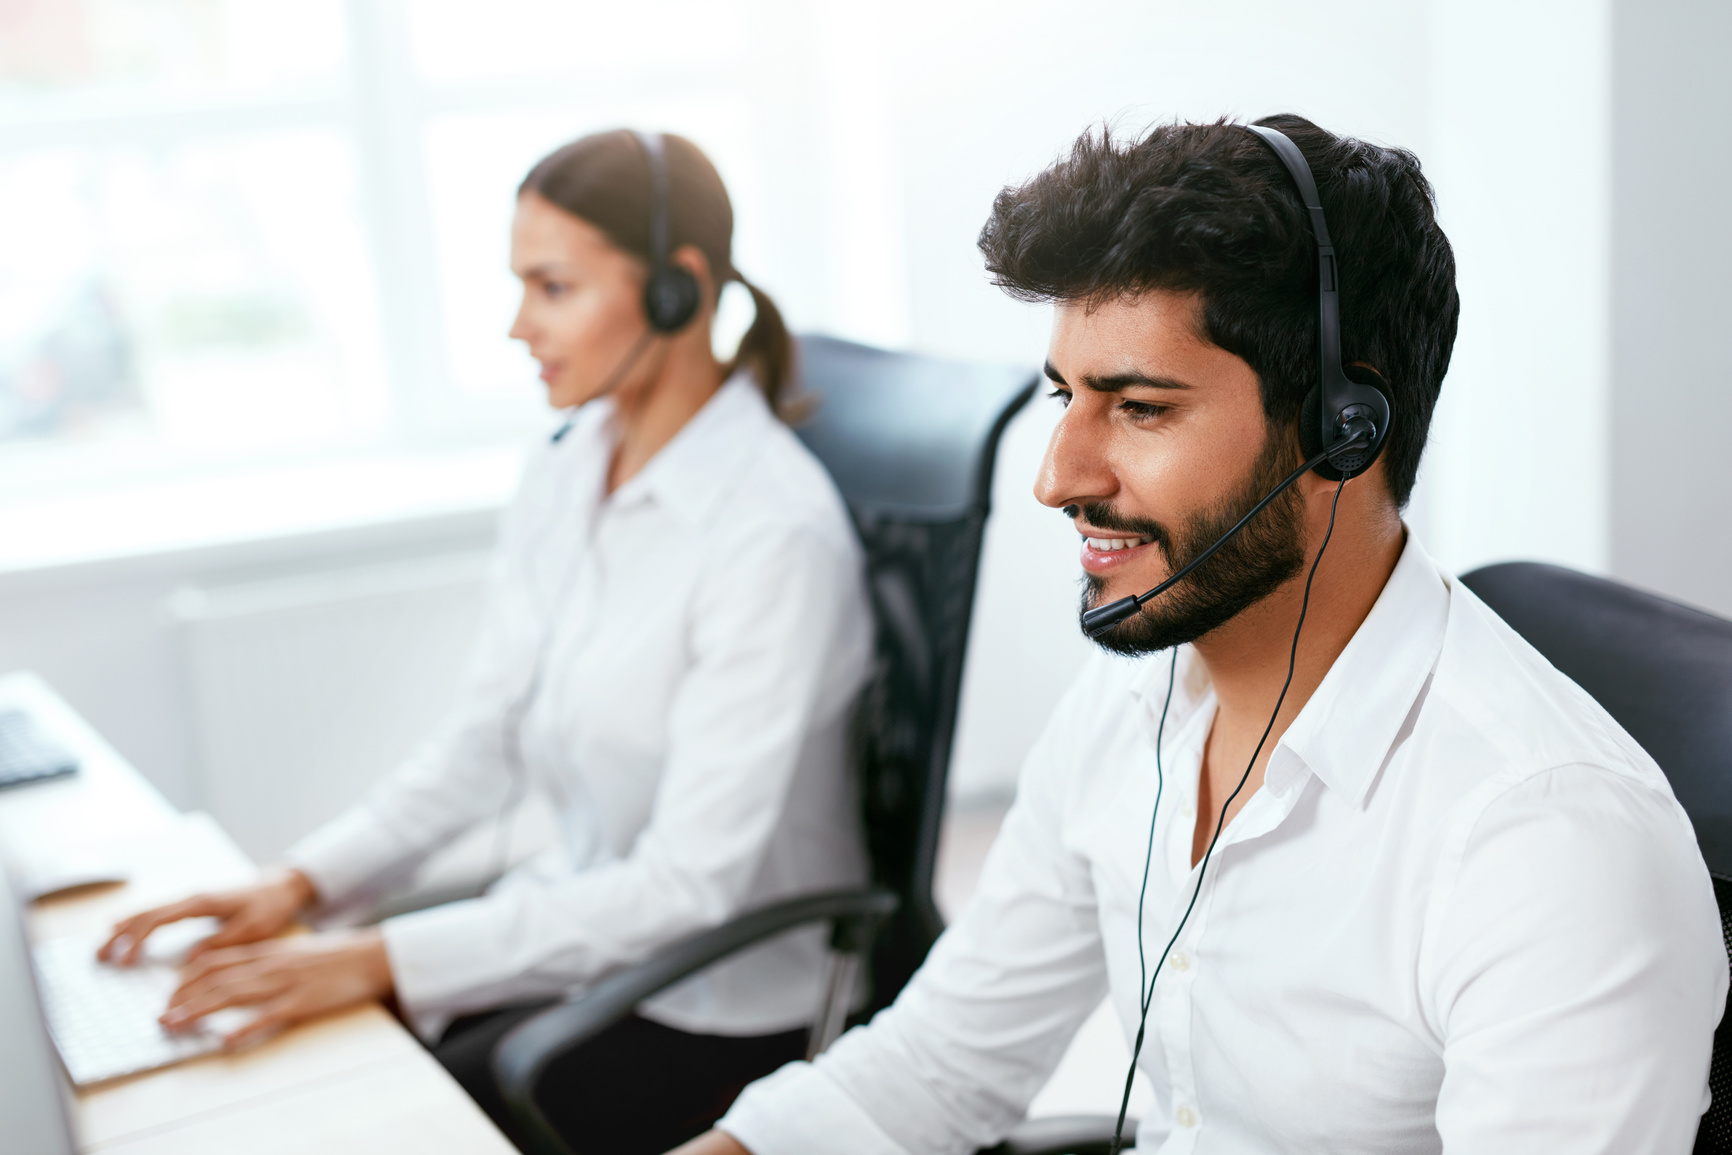 Contact Center Agent Consulting Customers Online